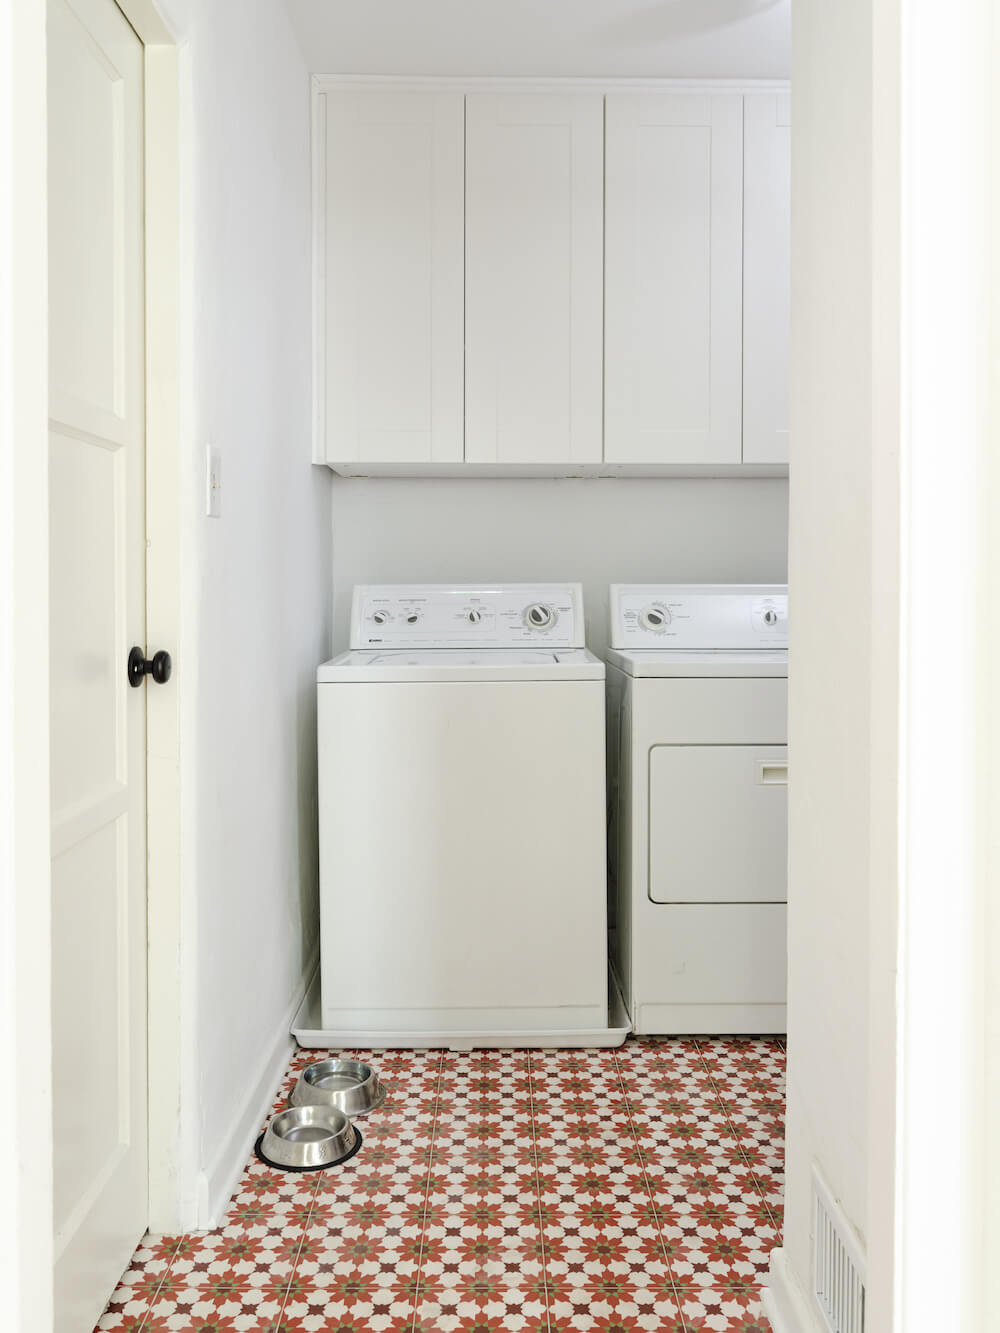 laundry room with white cabinets and geometric patterned tiles after renovation